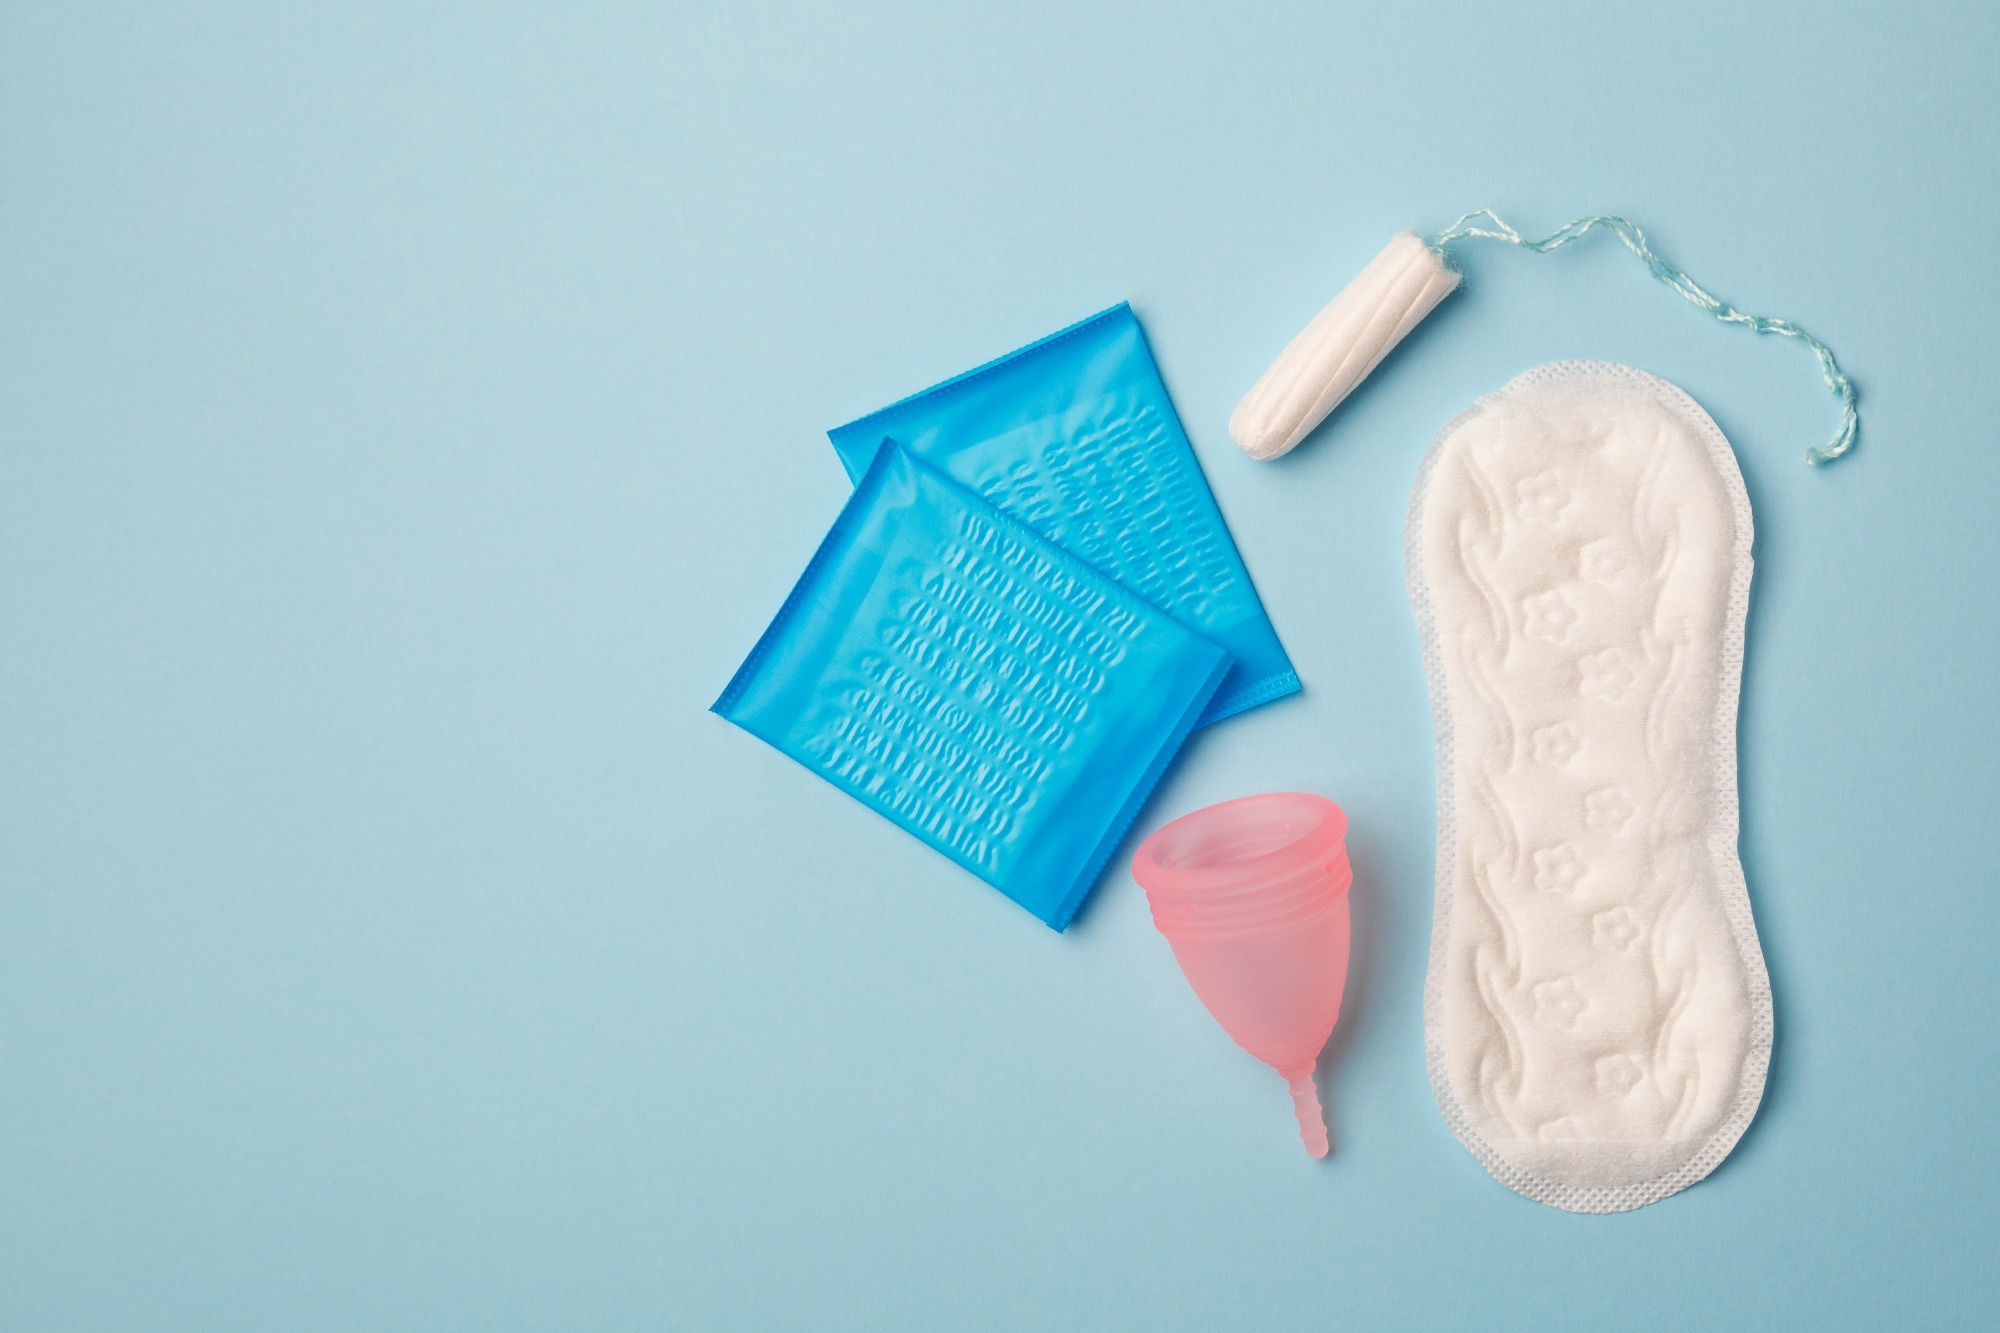 Study assesses capacity of modern menstrual products to better